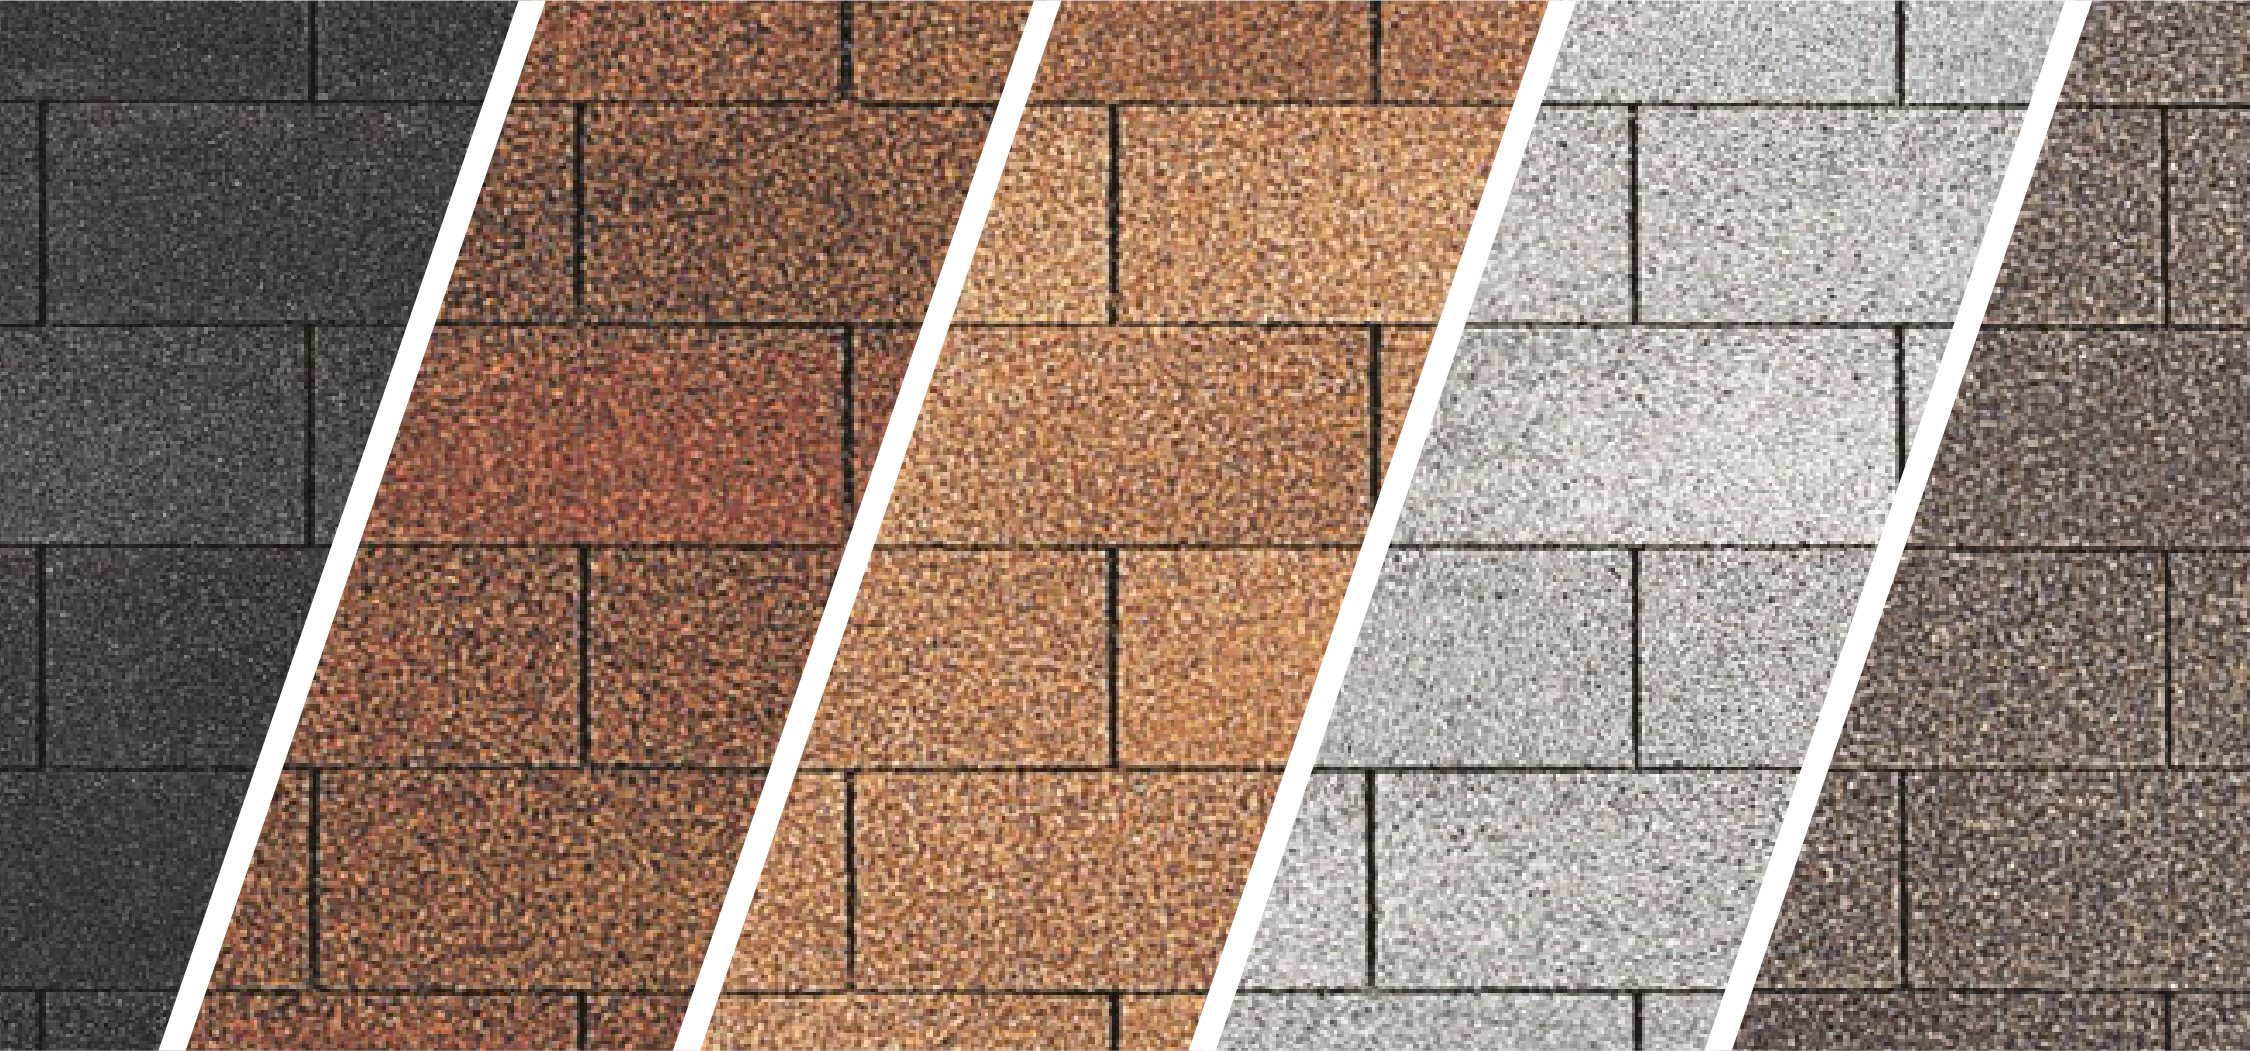 Five colors of shed shingles. From left to right: Black, Dark Brown, Light Brown, White, Driftwood.